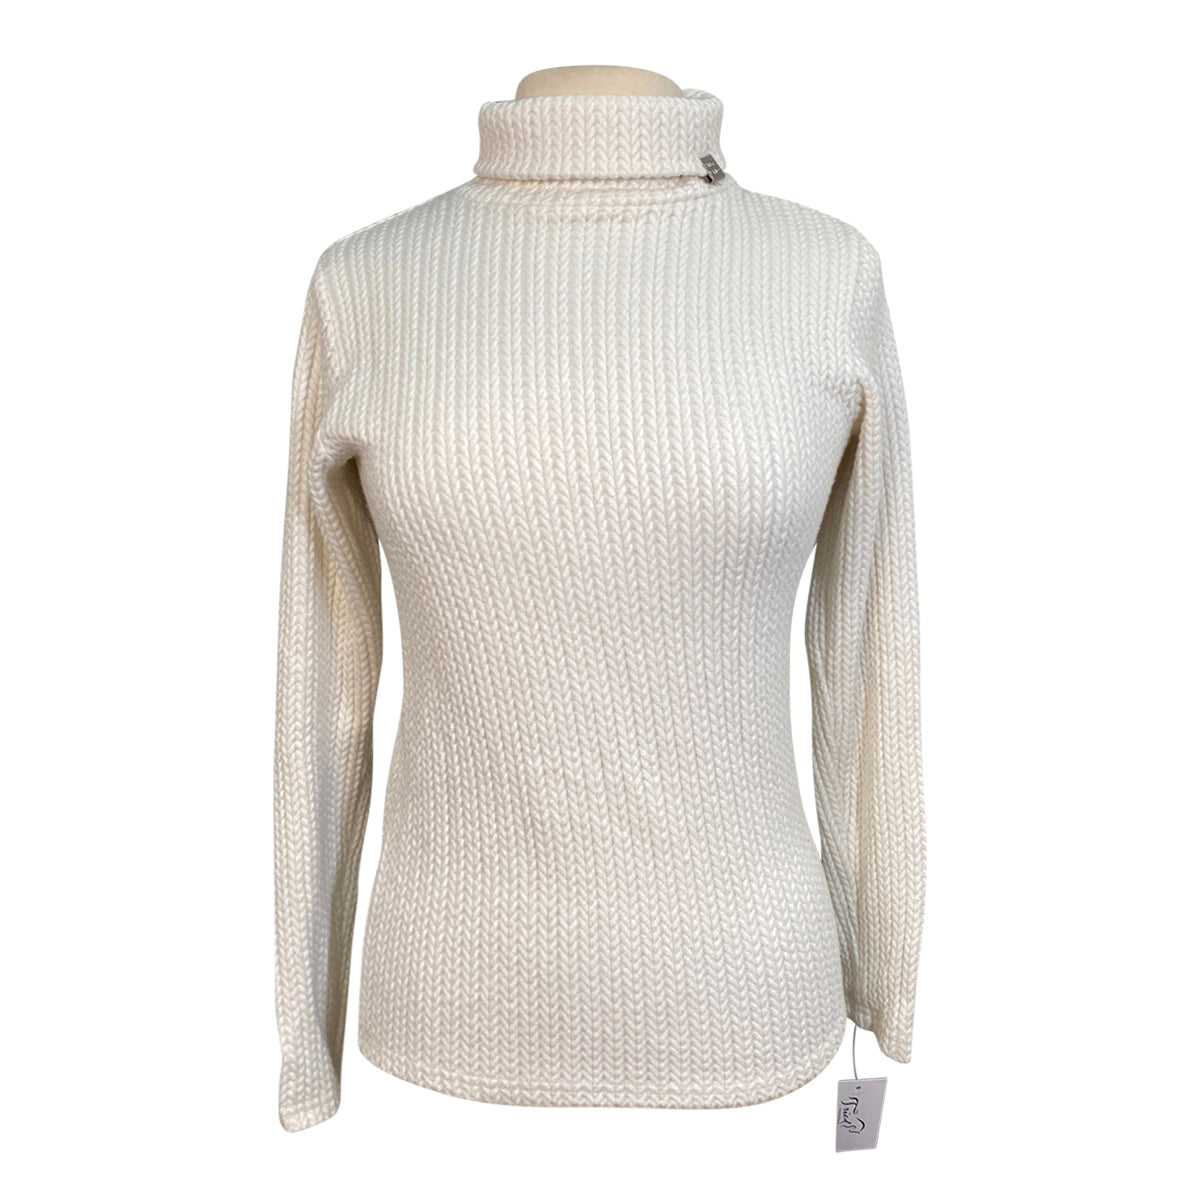 Kingsland Cable Knit Turtleneck Sweater in Ivory